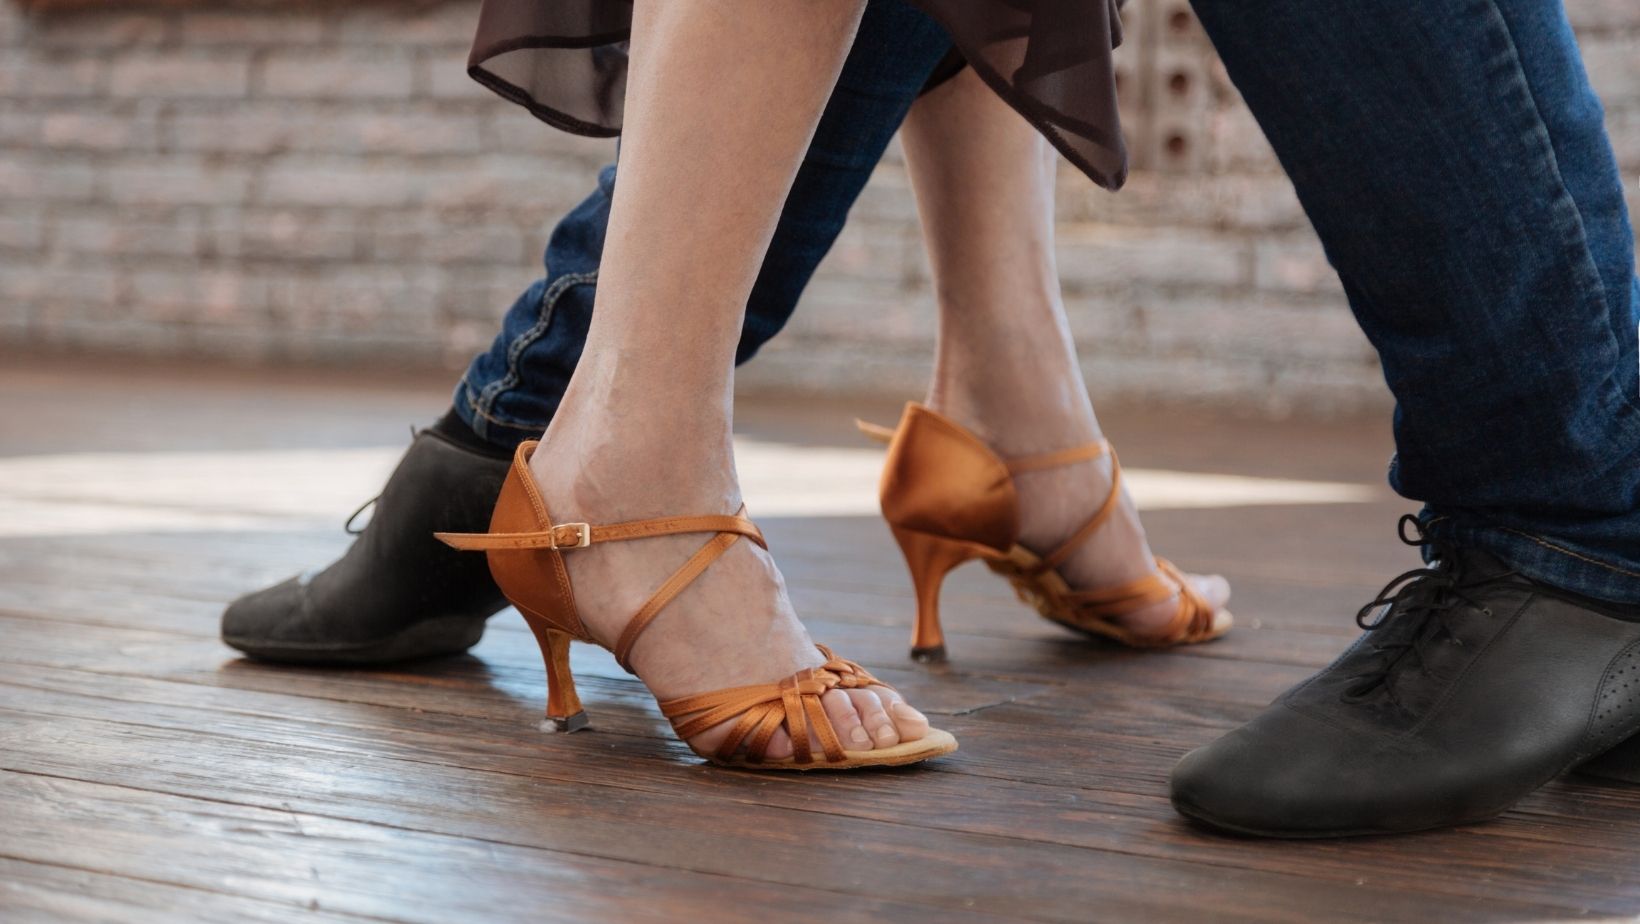 3 Things to Avoid When Learning Ballroom Dance